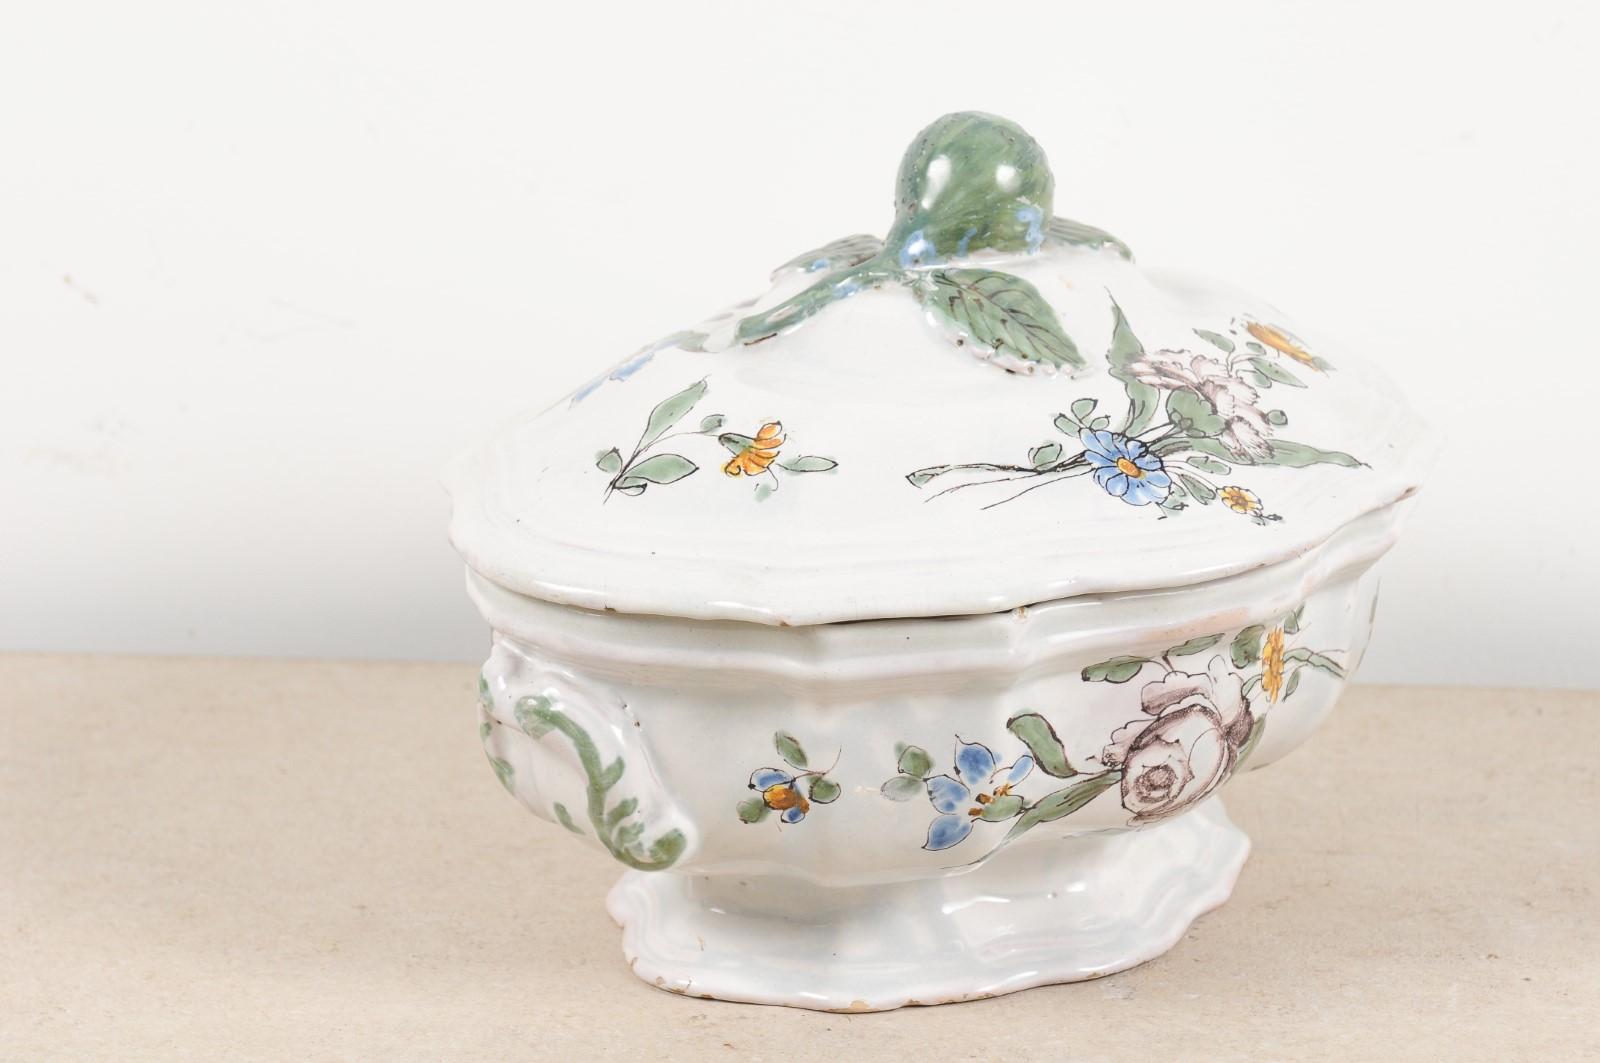 French 1750s Faience Oval Shaped Soup Tureen from Bordeaux with Floral Decor 2